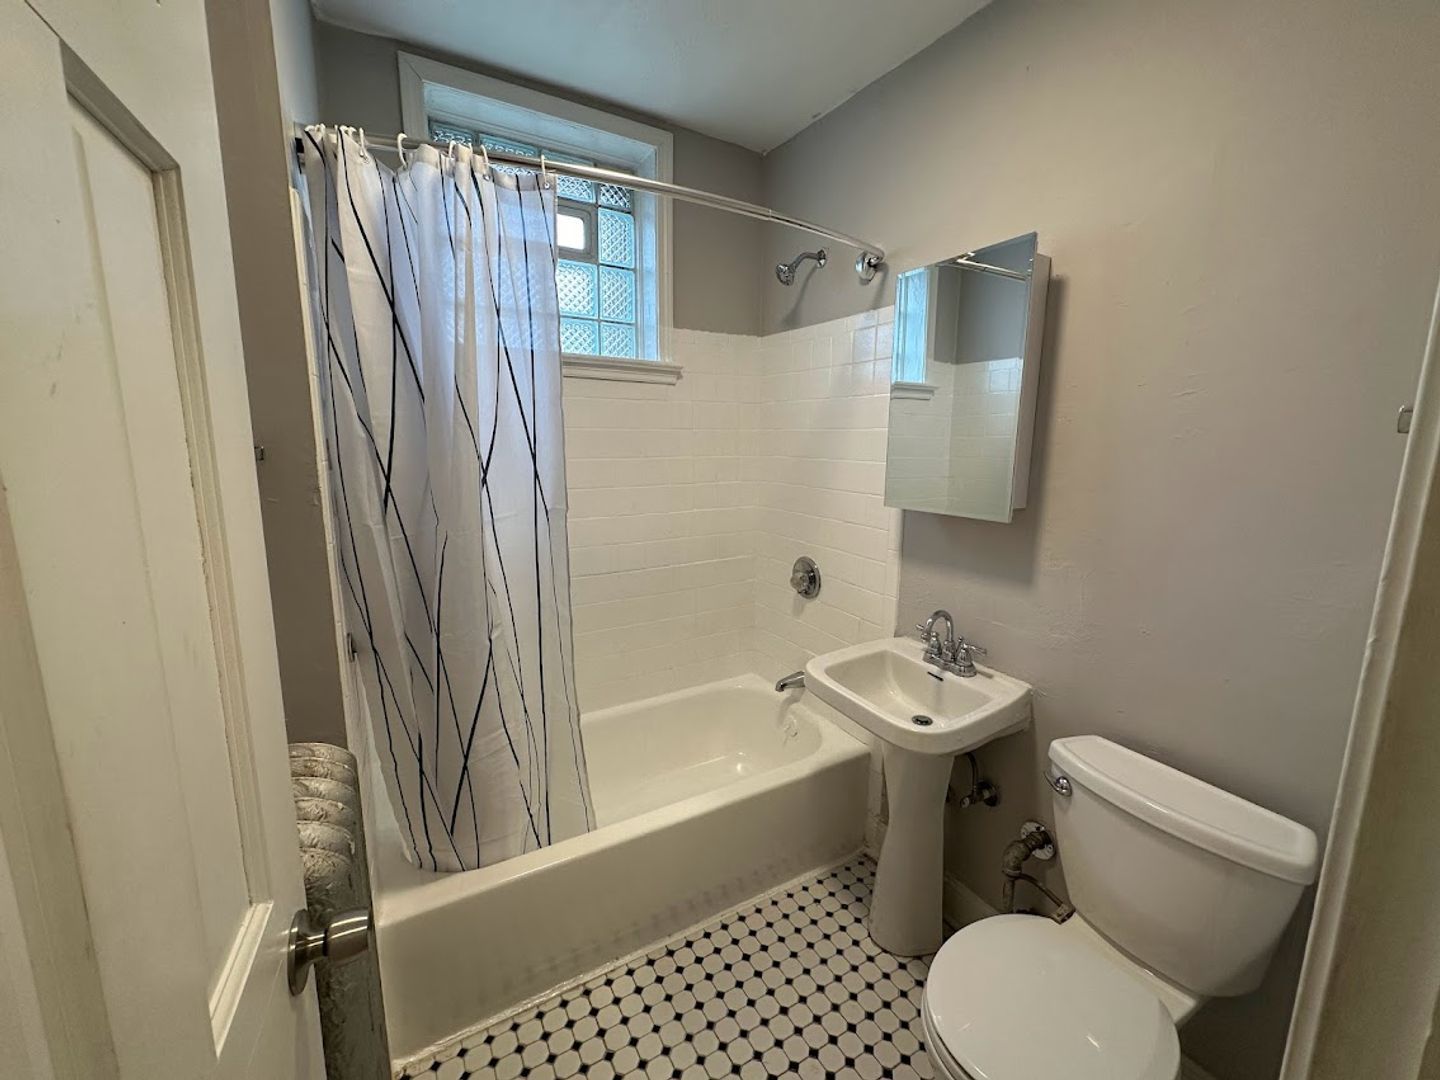 1 Bed and  1 Bath Apartment Unit for Rent in Cleveland Heights | Prime Location! Image